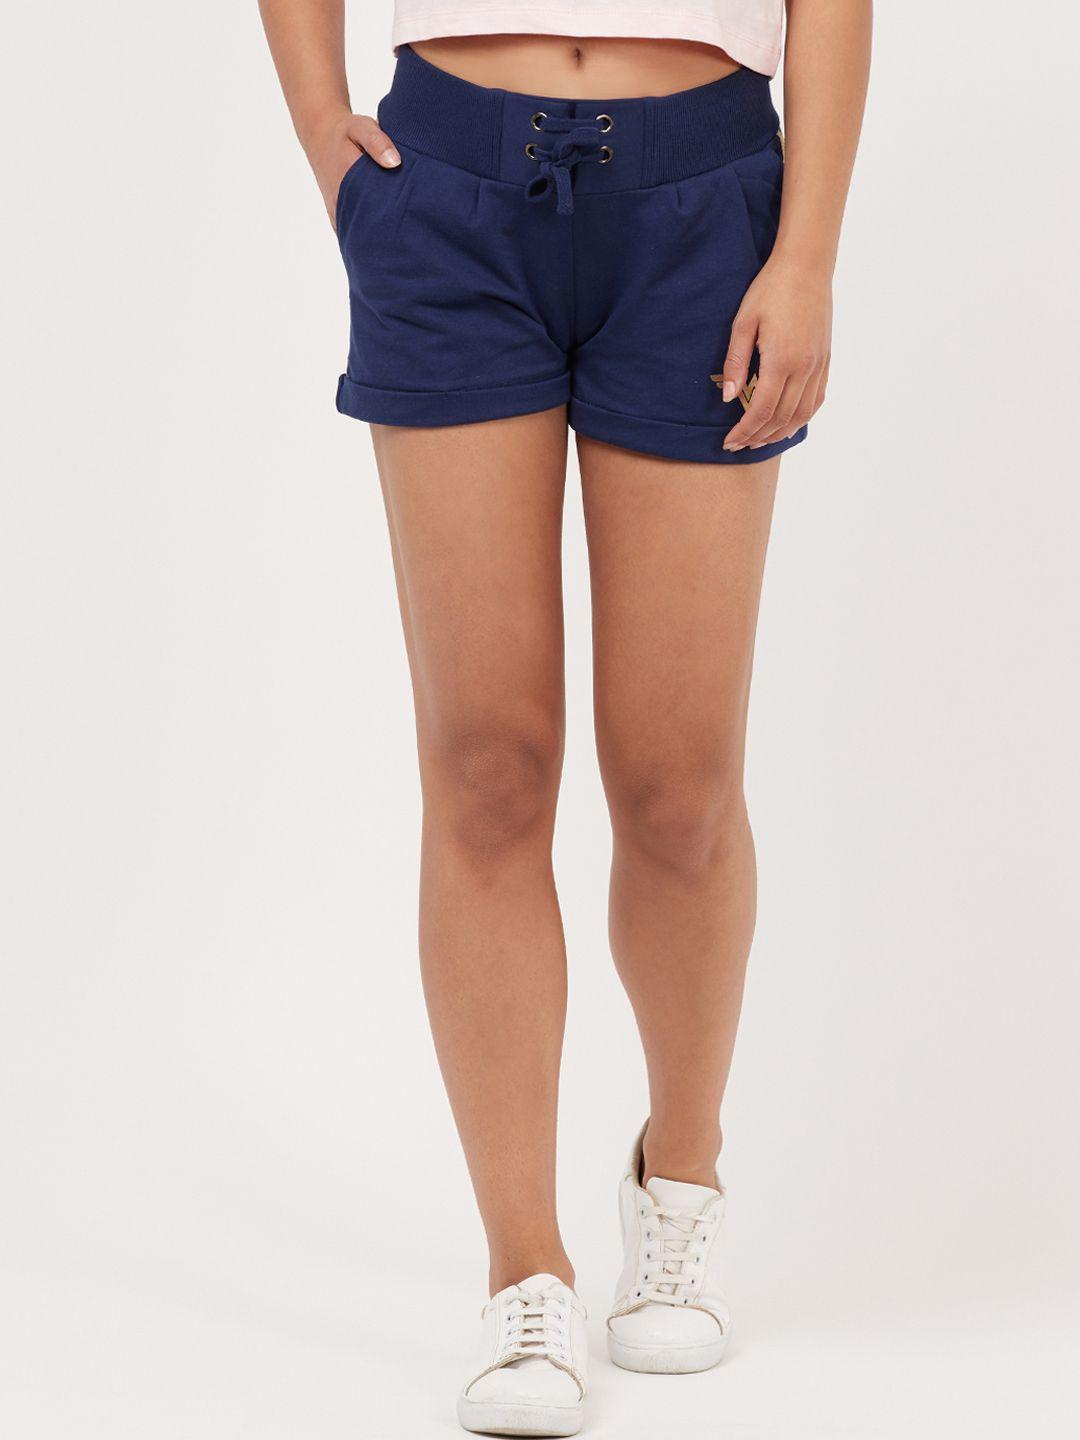 free authority wonder woman featured navy shorts for women